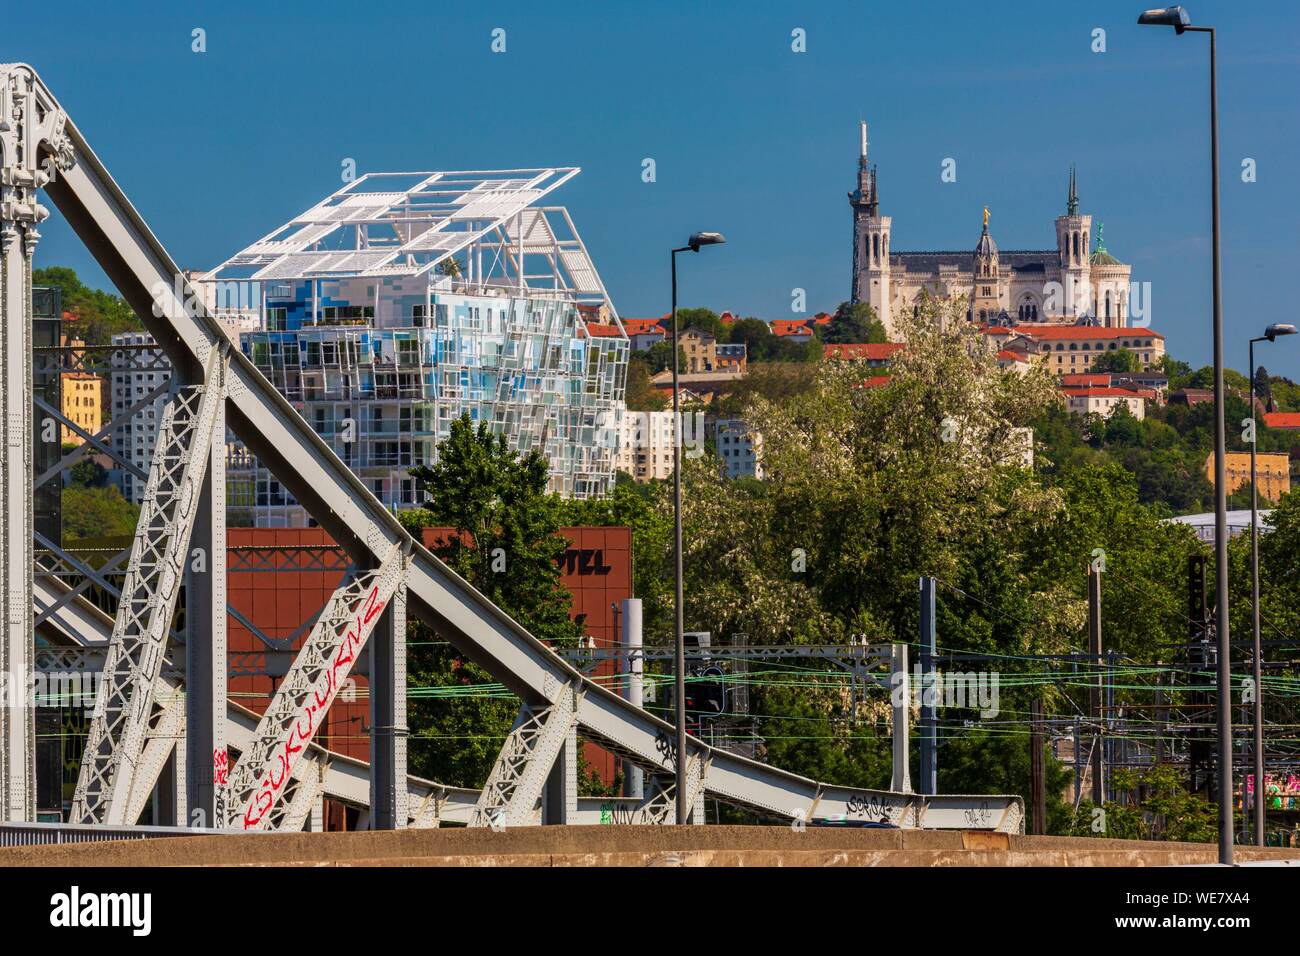 France, Rhone, Lyon, La Confluence district south of the Presqu'ile, close to the confluence of the Rhone and the Saone rivers, view of the railway and road bridge of the Mulatiere, the roof of the Ycone tower by Jean Nouvel and the basilica of Notre Dame de Fourviere Stock Photo